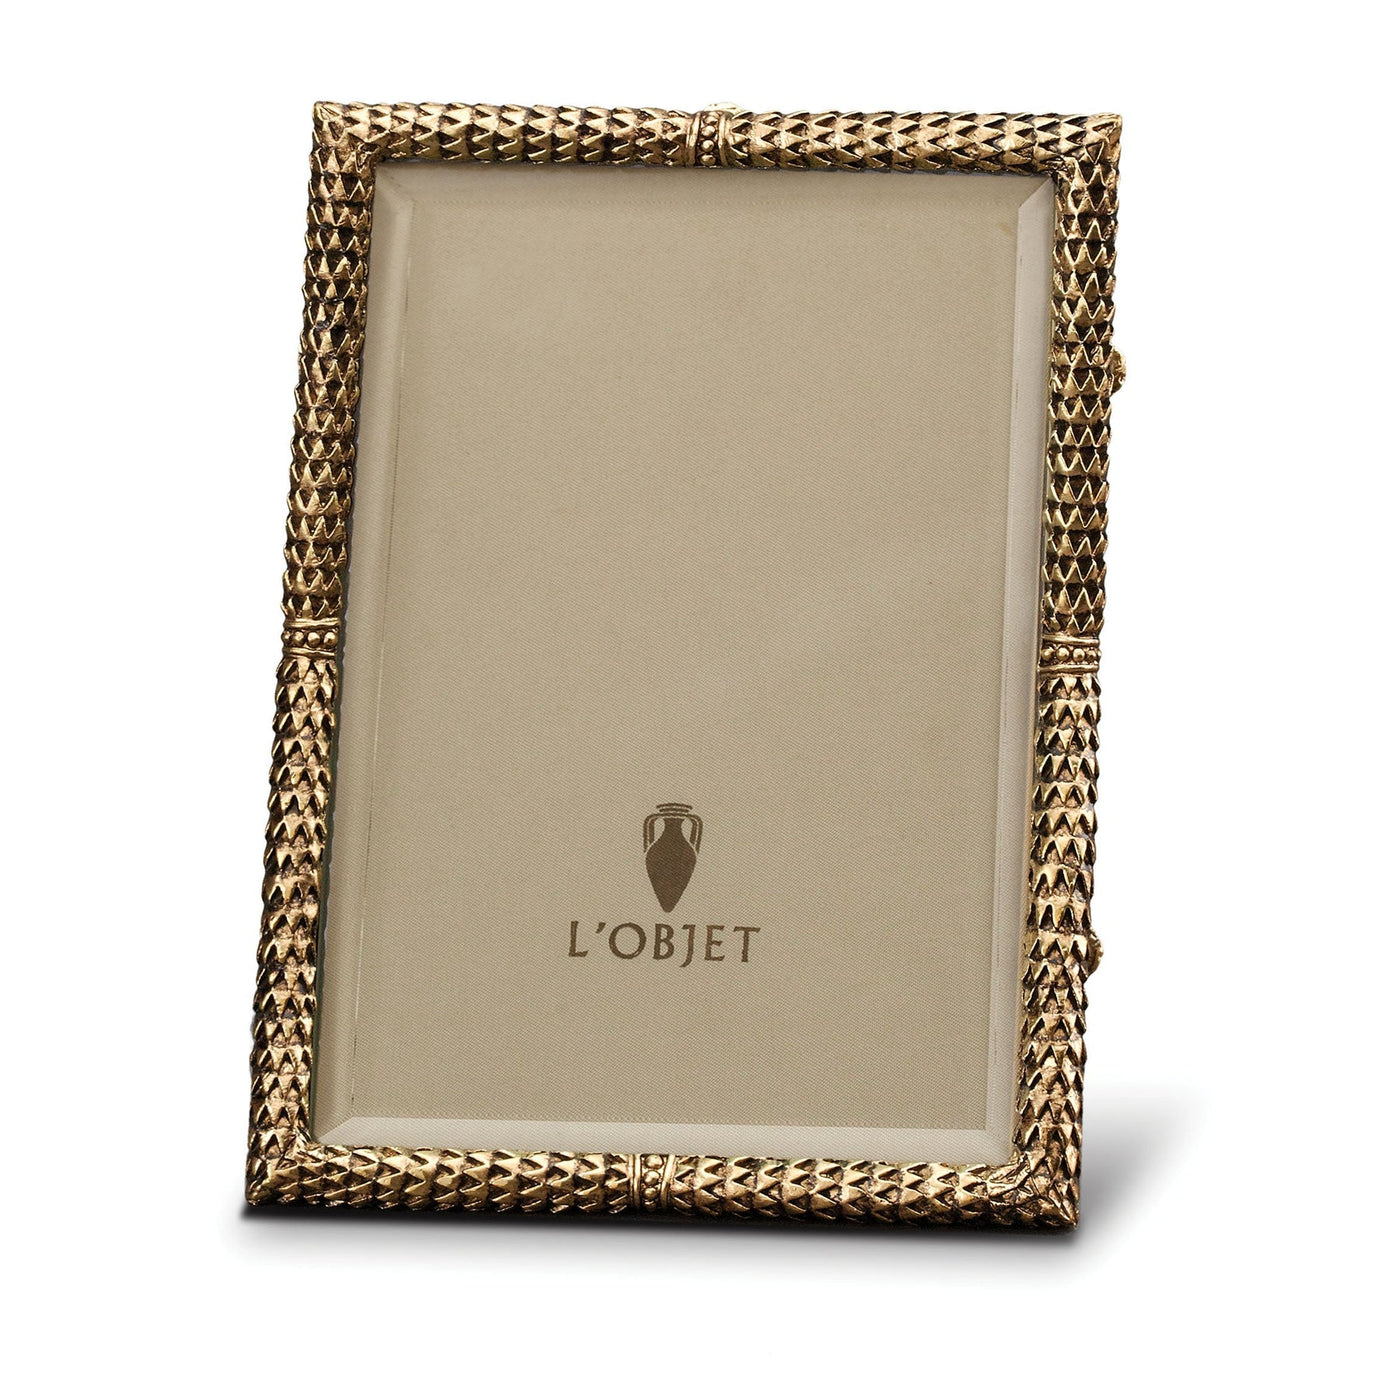 L'OBJET FRAME SCALES  (Available in sizes and colors)